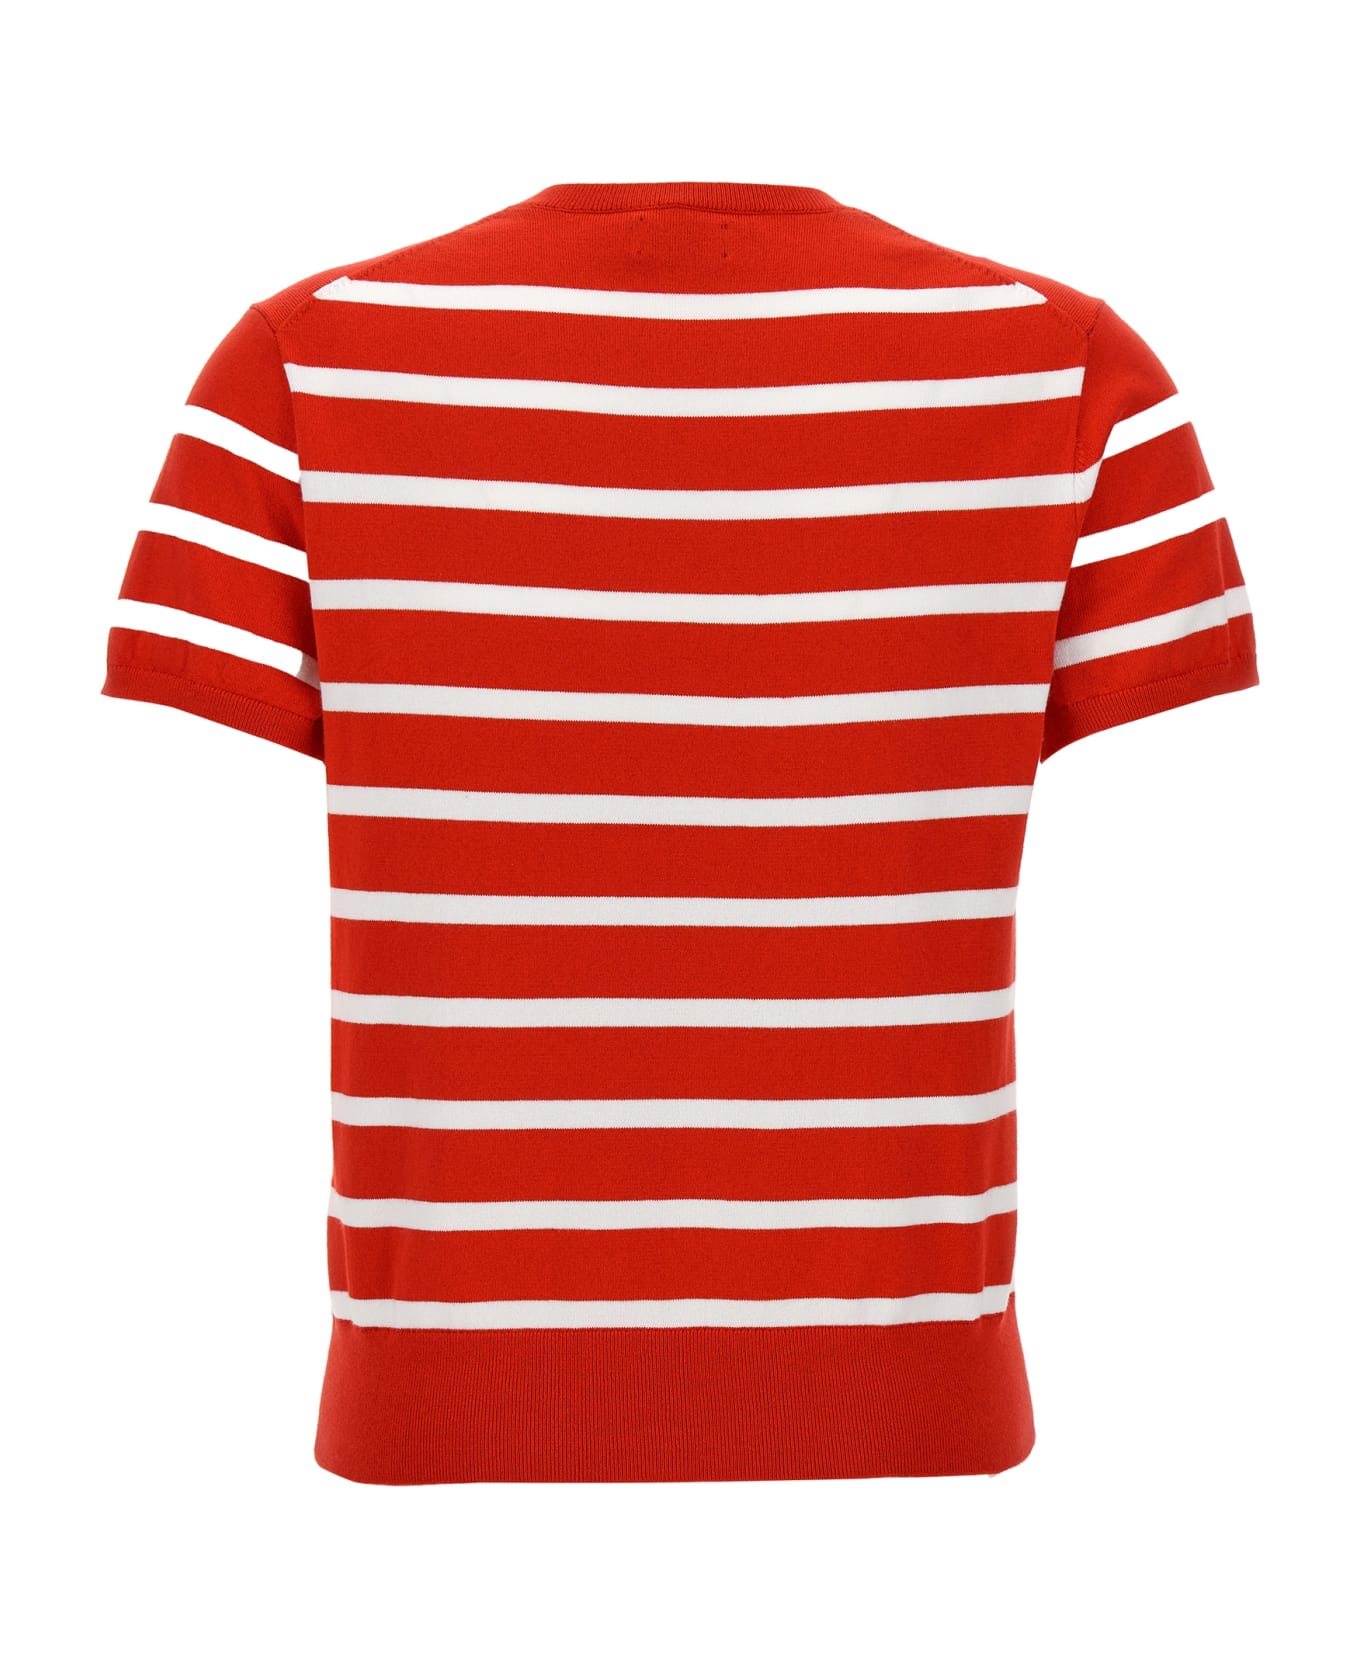 Polo Ralph Lauren Striped Sweater - Red